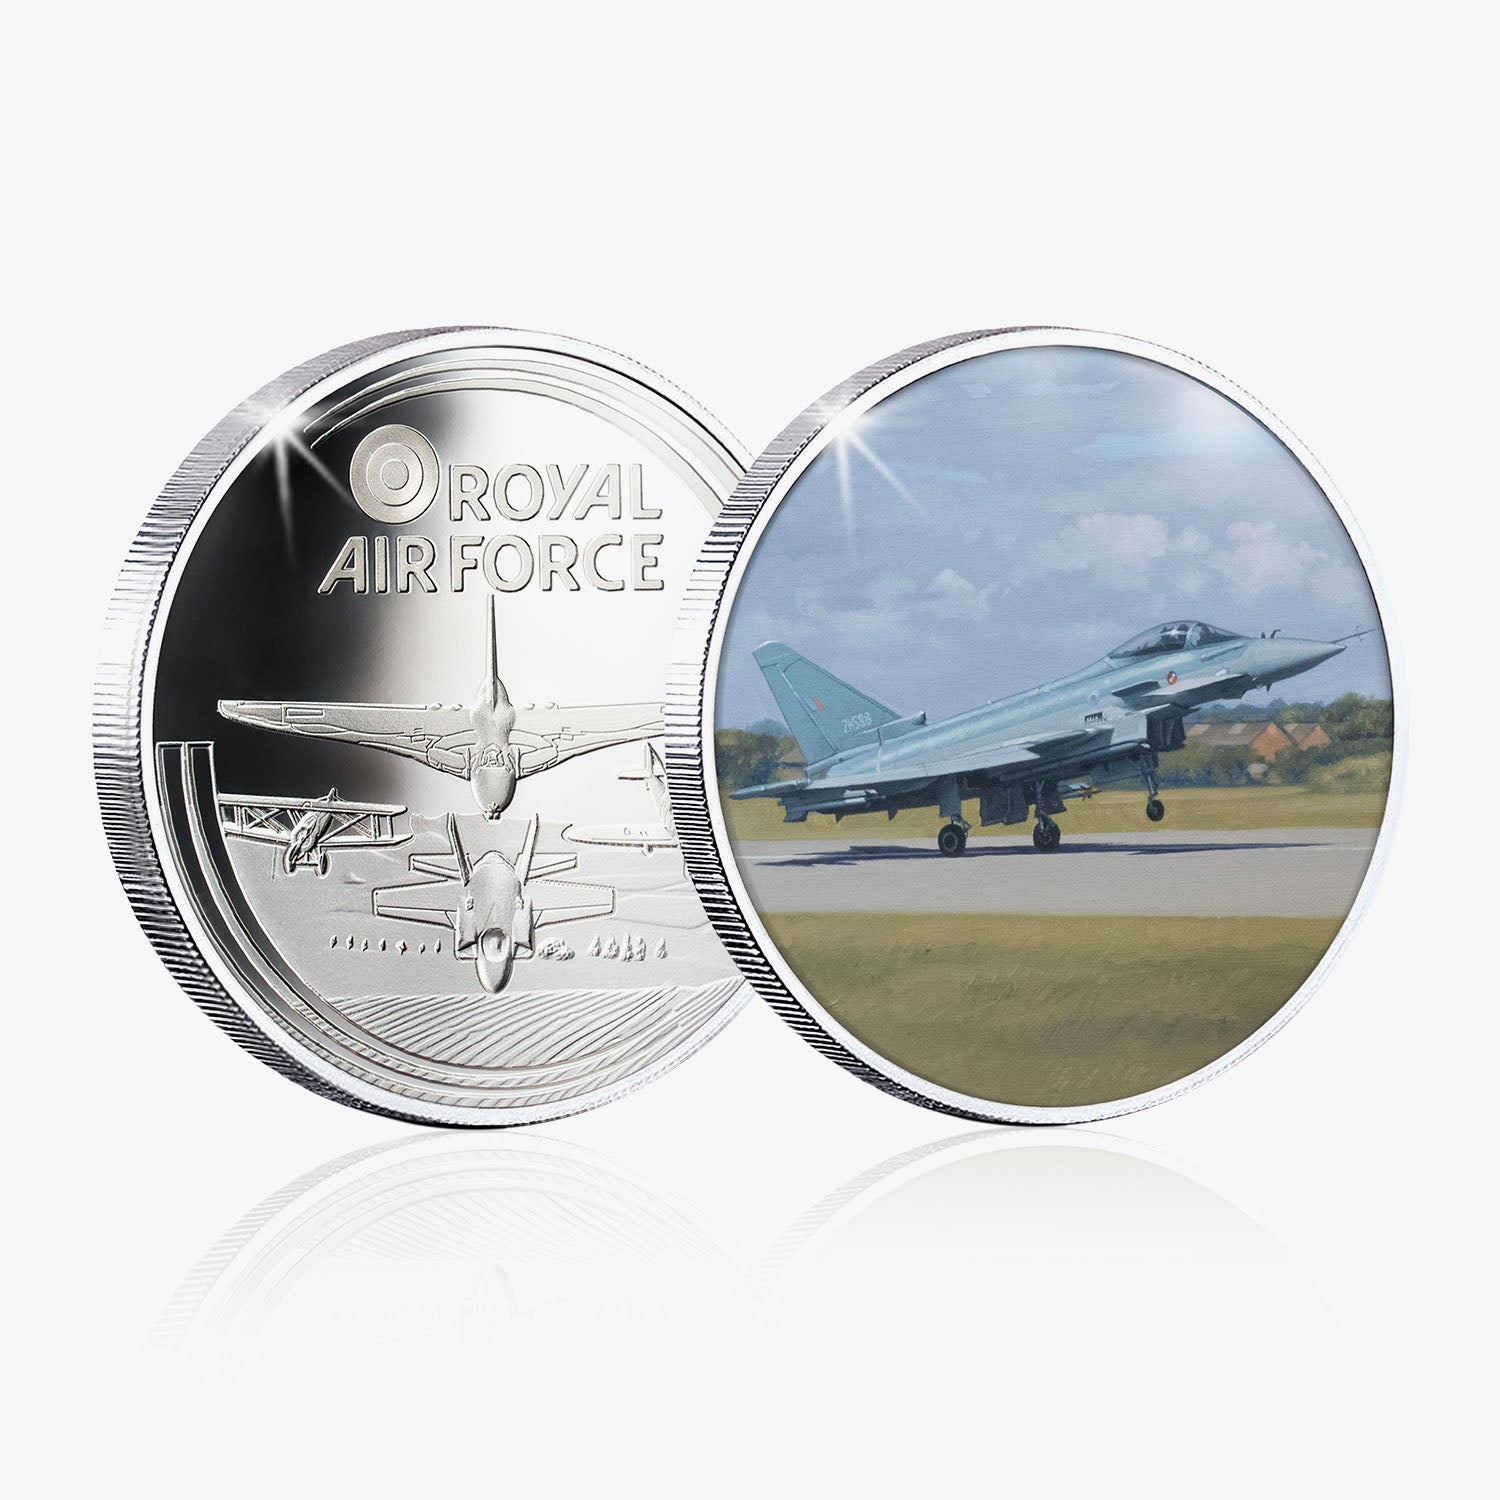 Ascent To The Skies Silver-Plated Commemorative